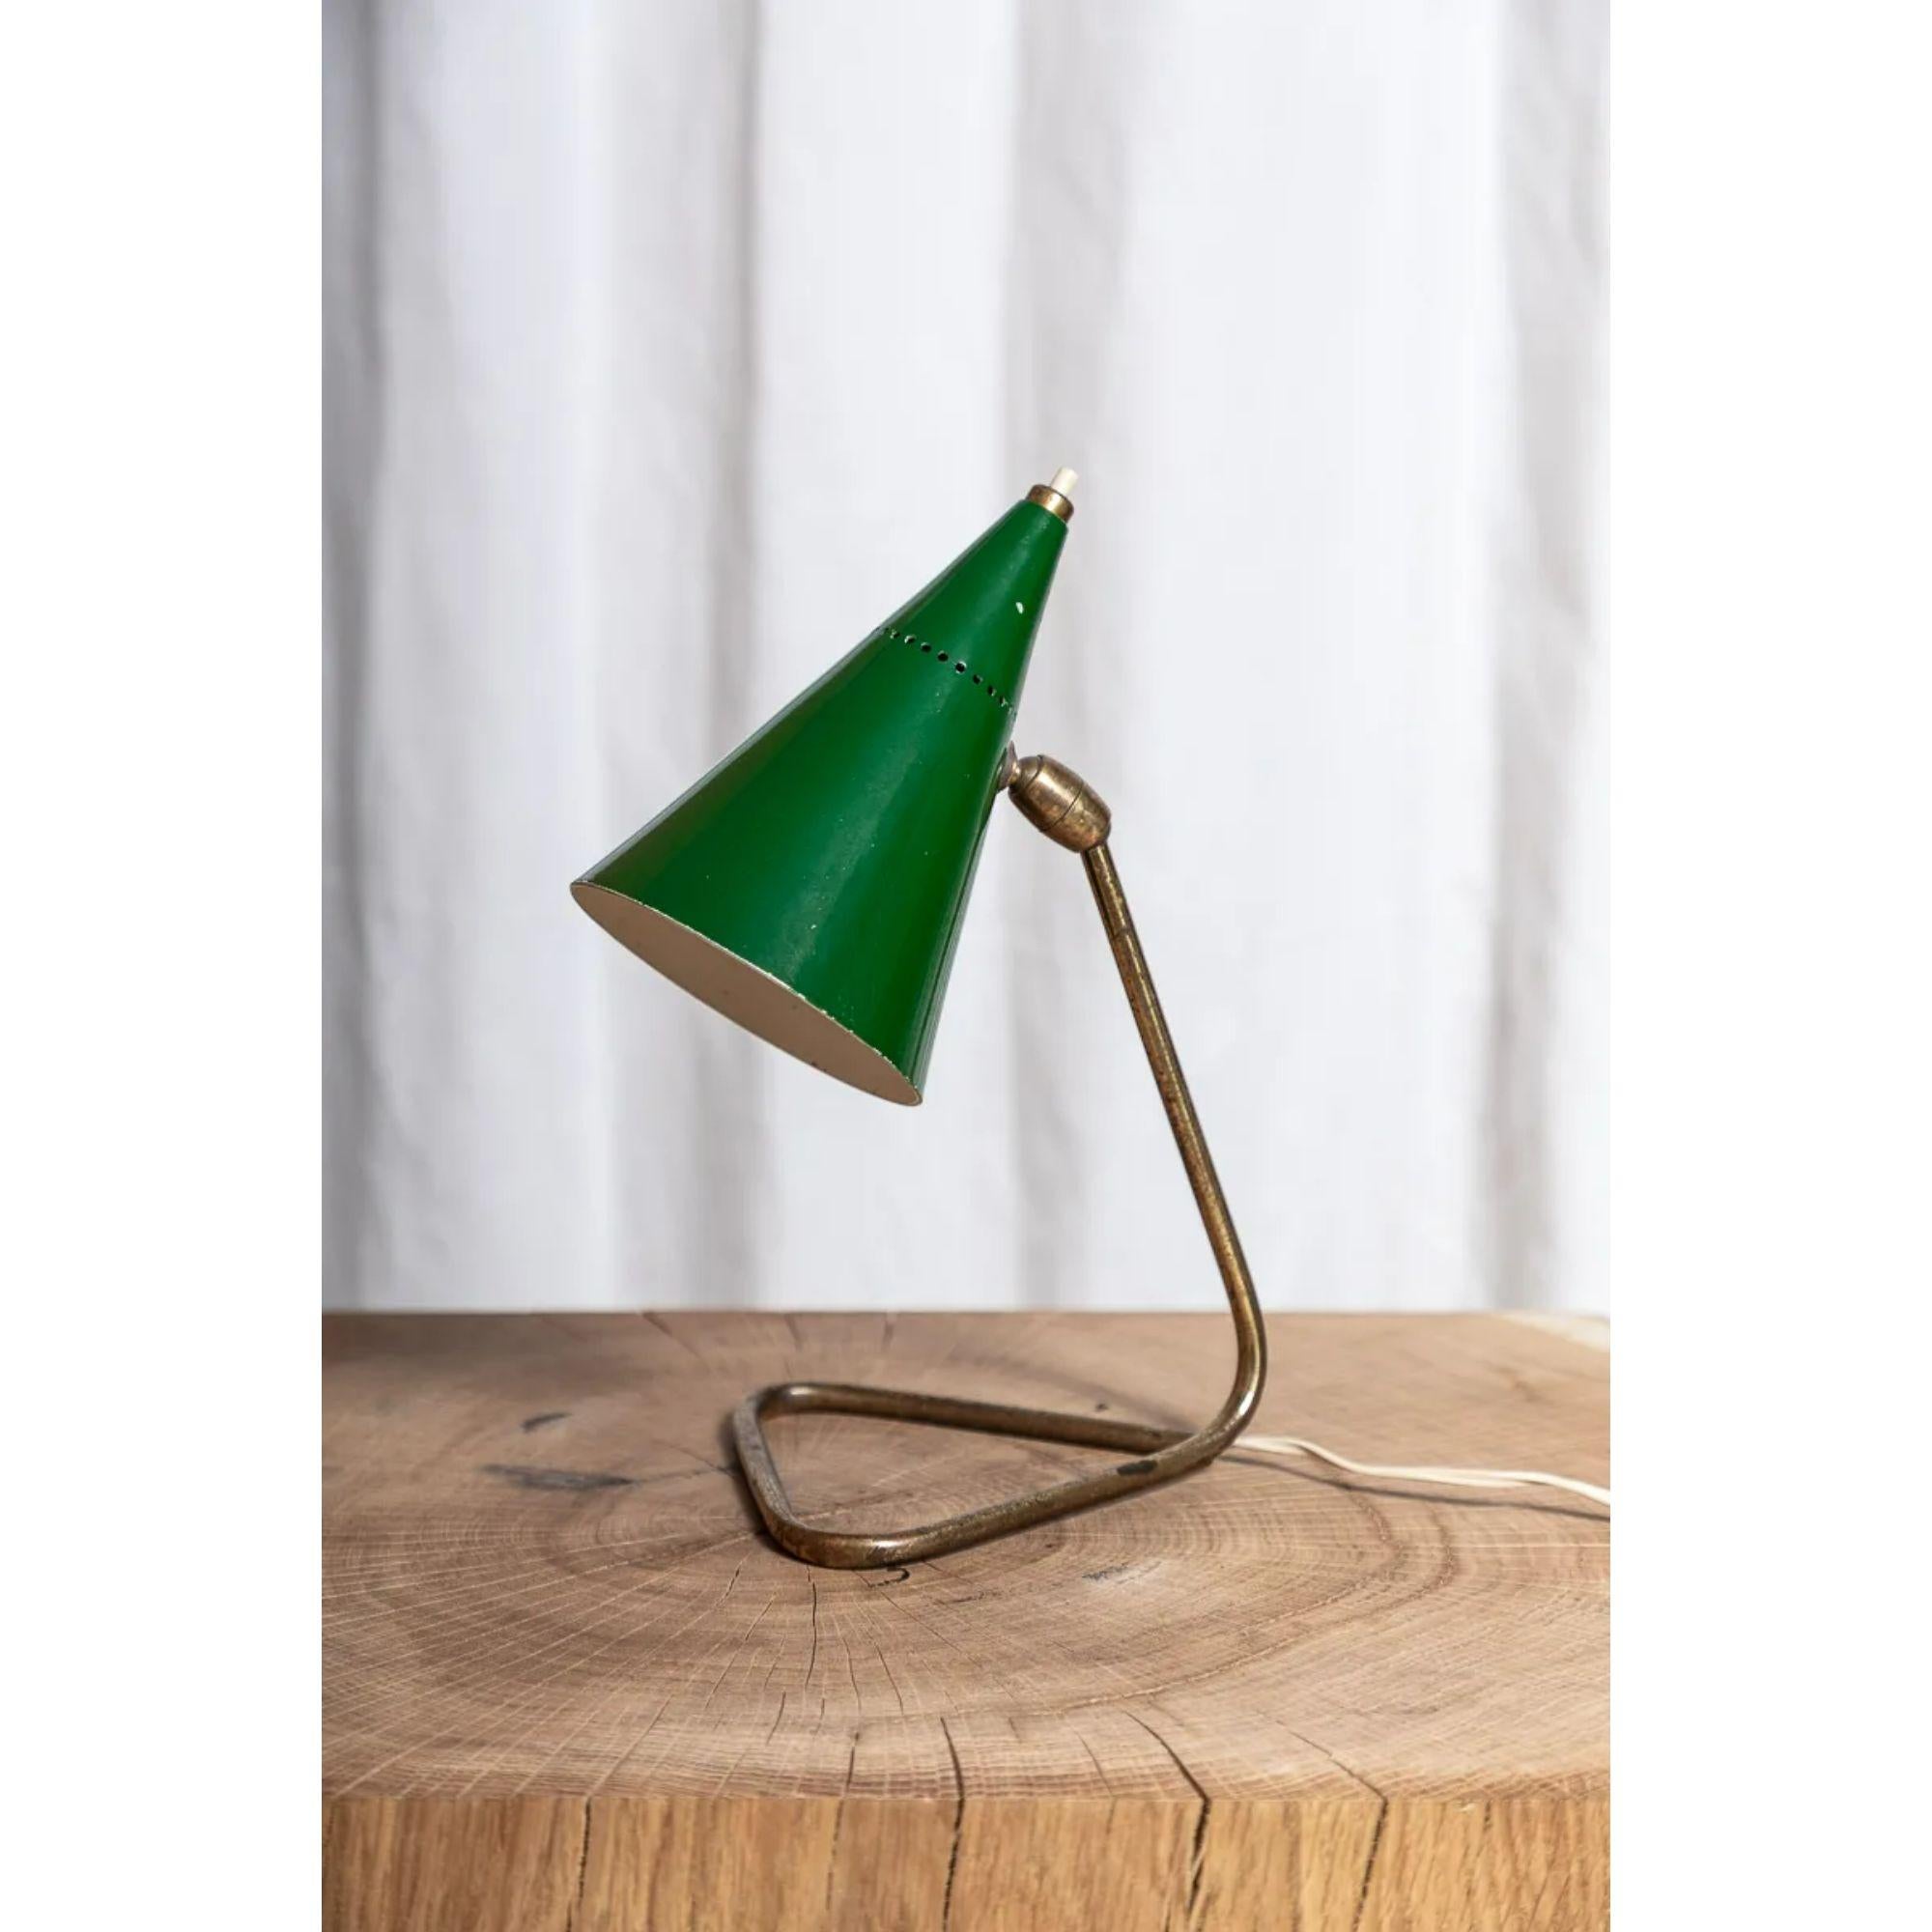 Desk lamp by Gilardi and Barzaghi, circa 1954.

'Cocotte' desk lamp by Gilardi & Barzaghi c.1954 gilt brass tubular base and green lacquered shade. 

Published: Domus 298 (september 1954)

Dimensions: H 27cm x W 15cm x D 15cm.